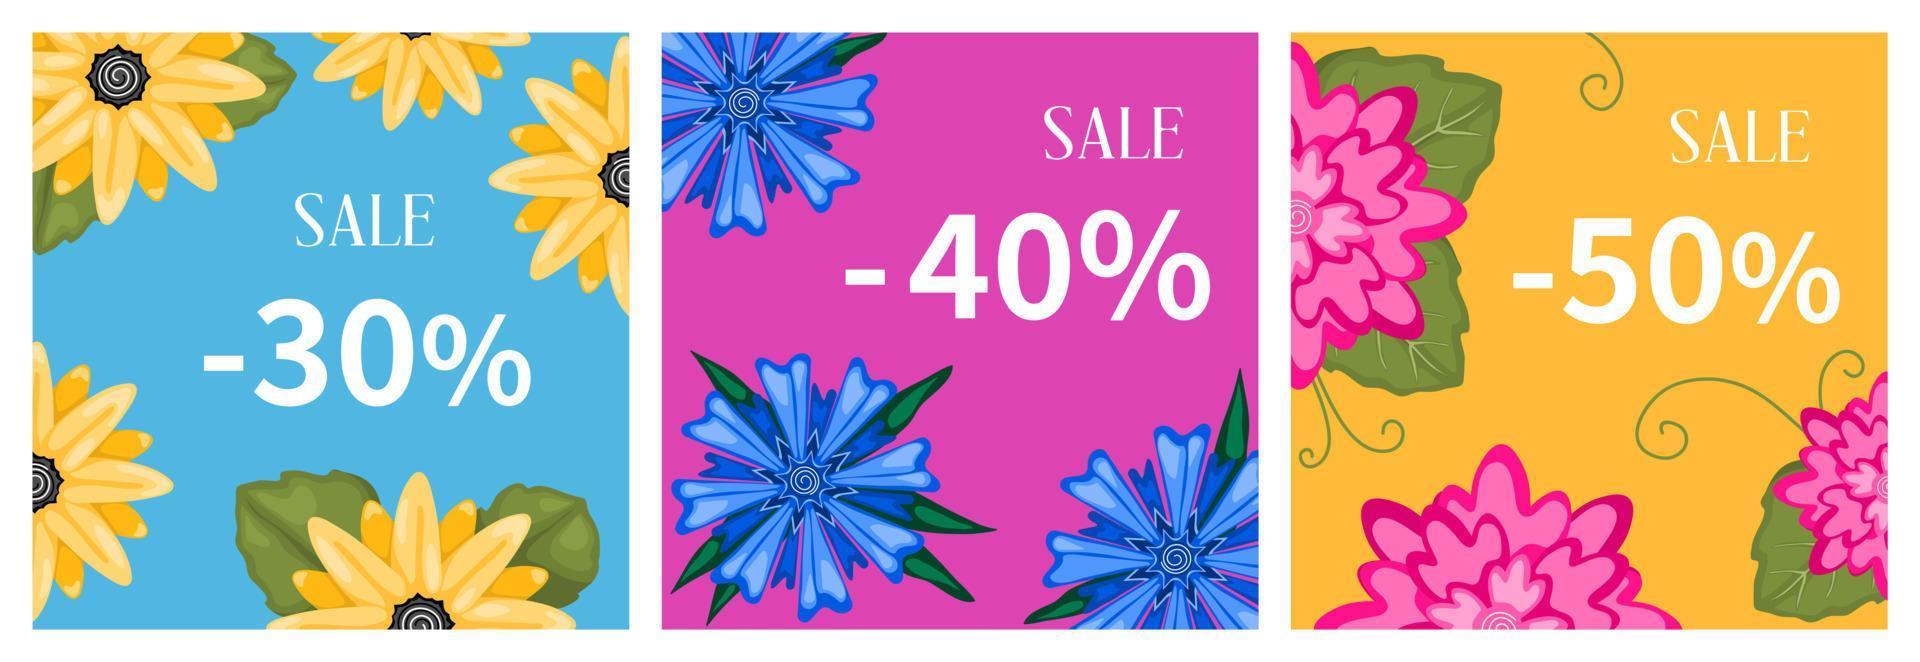 Sale banners with flowers and 30, 40, 50 percent discount. May be used for ads, promotions, websites, magazines. Vector illustration.